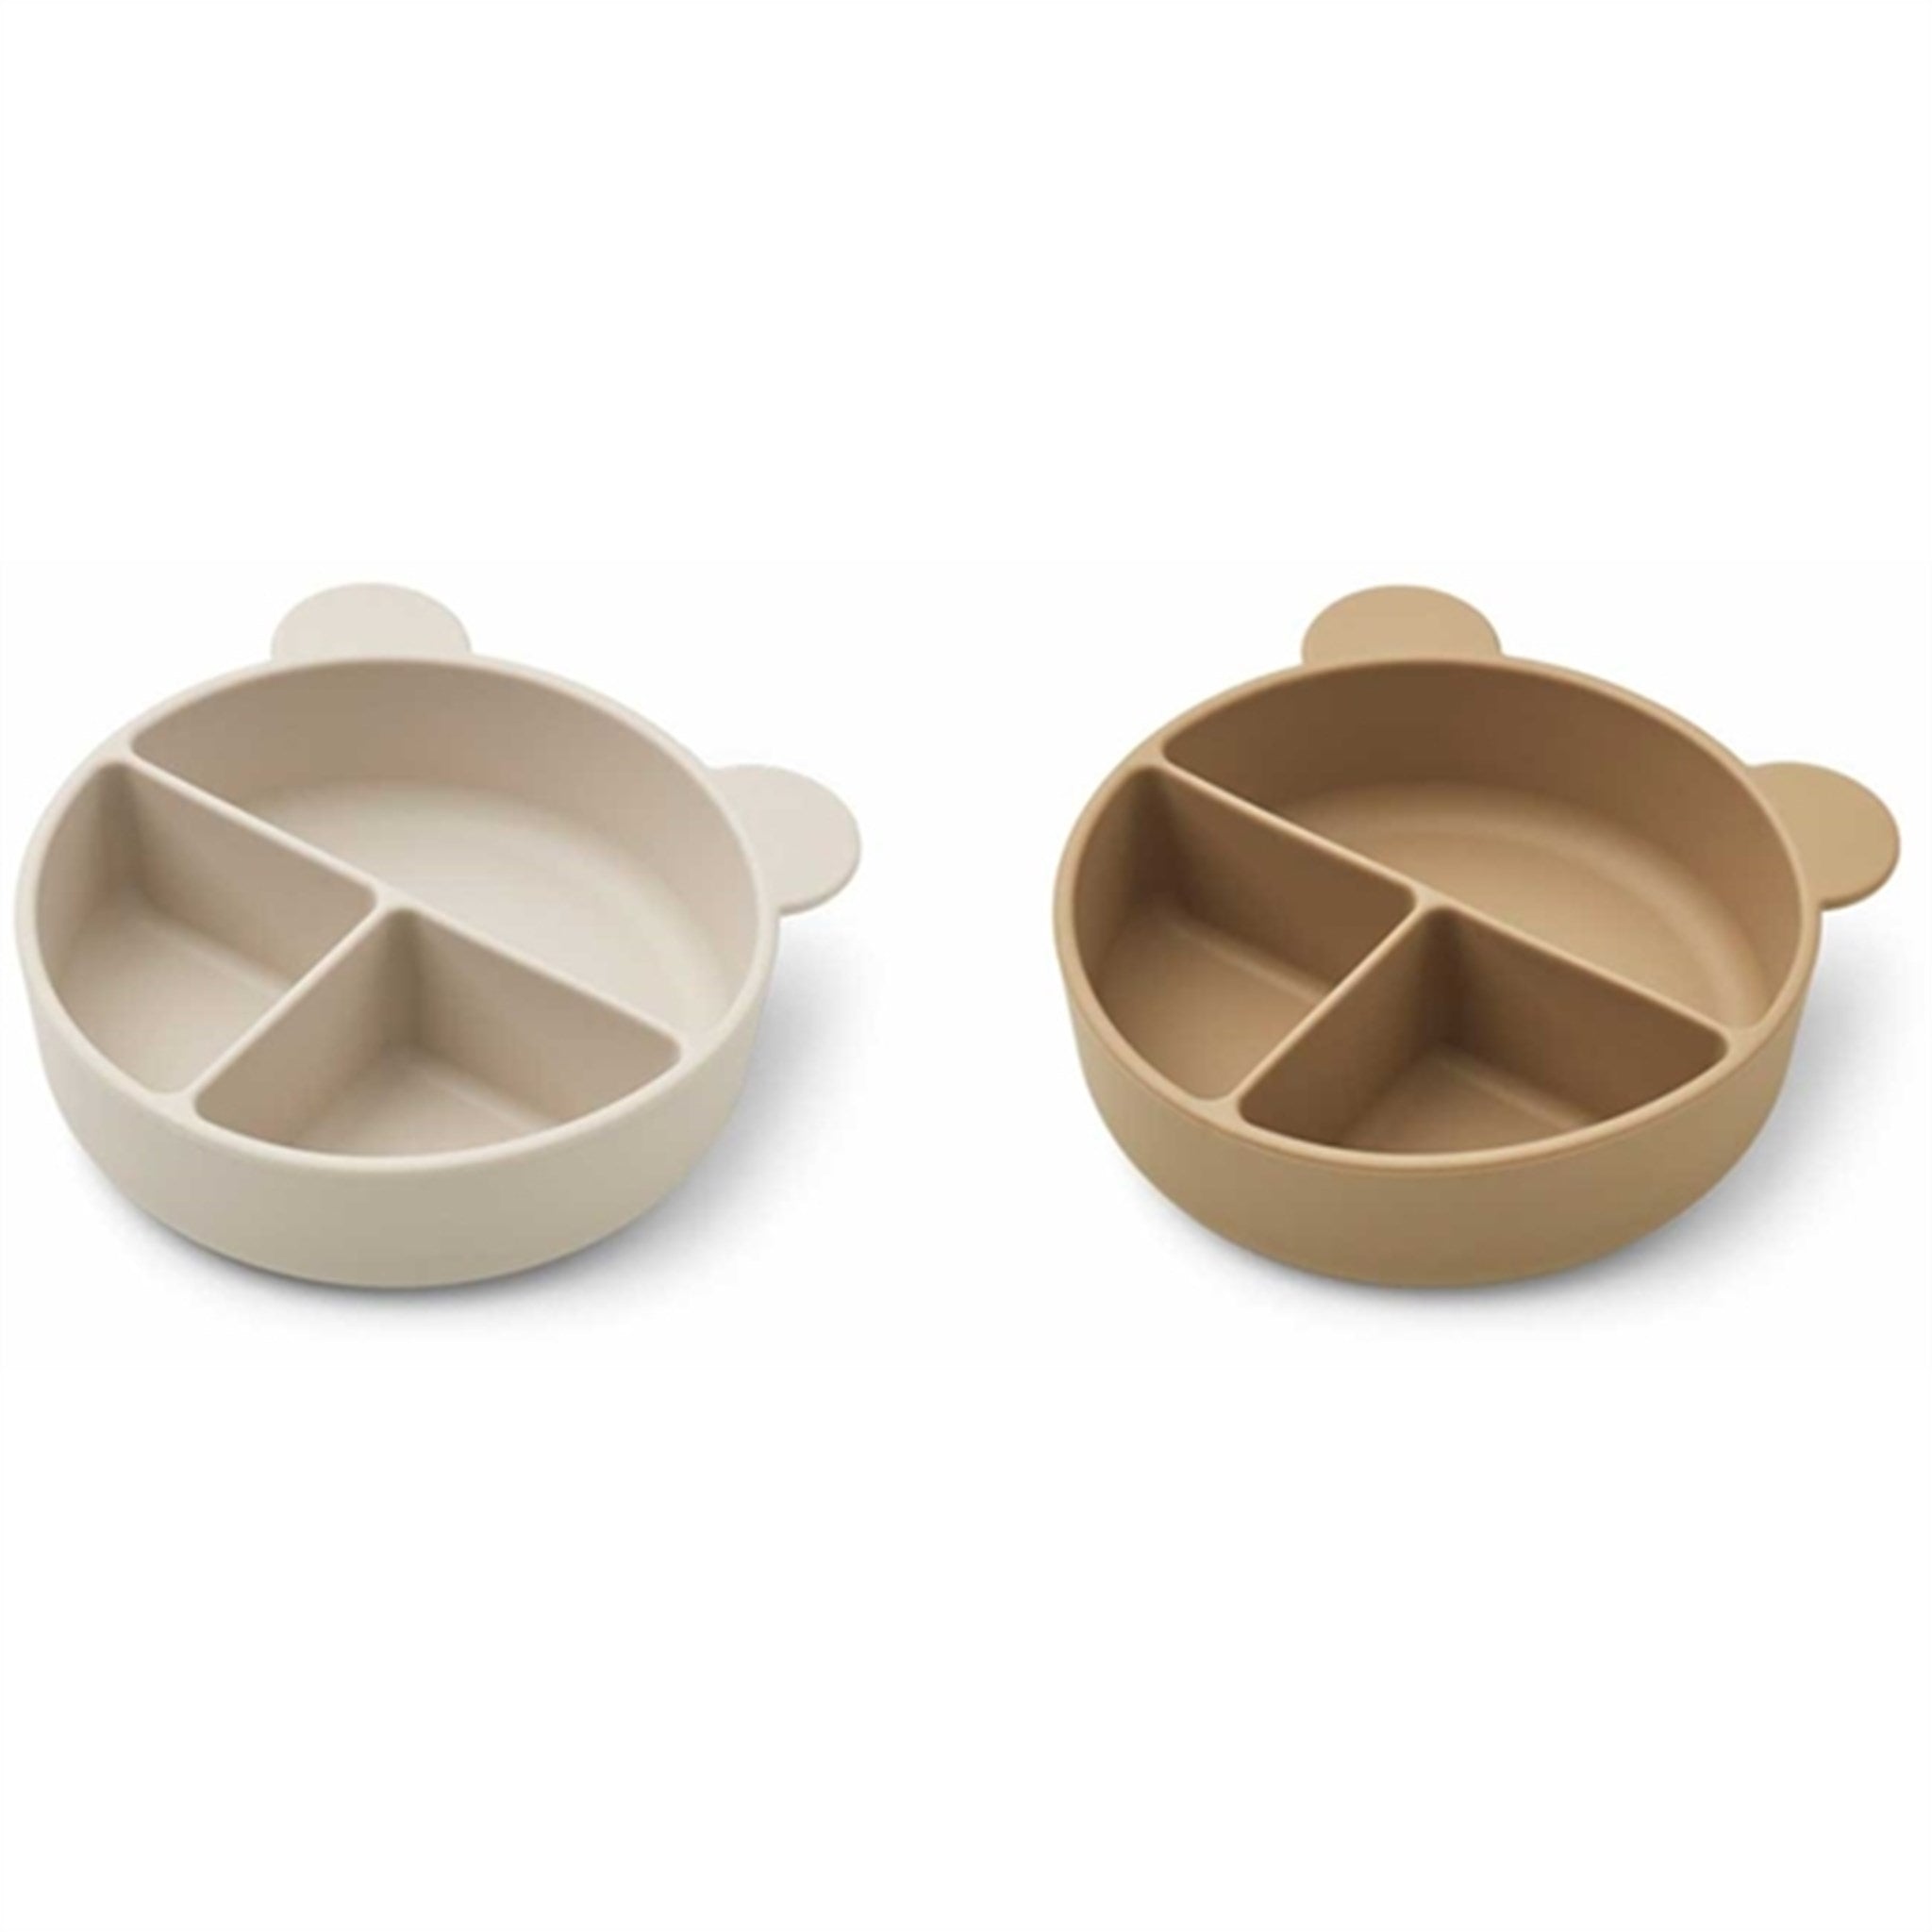 Liewood Conny Silicone Divider Bowls 2-pack Sandy/Oat Mix